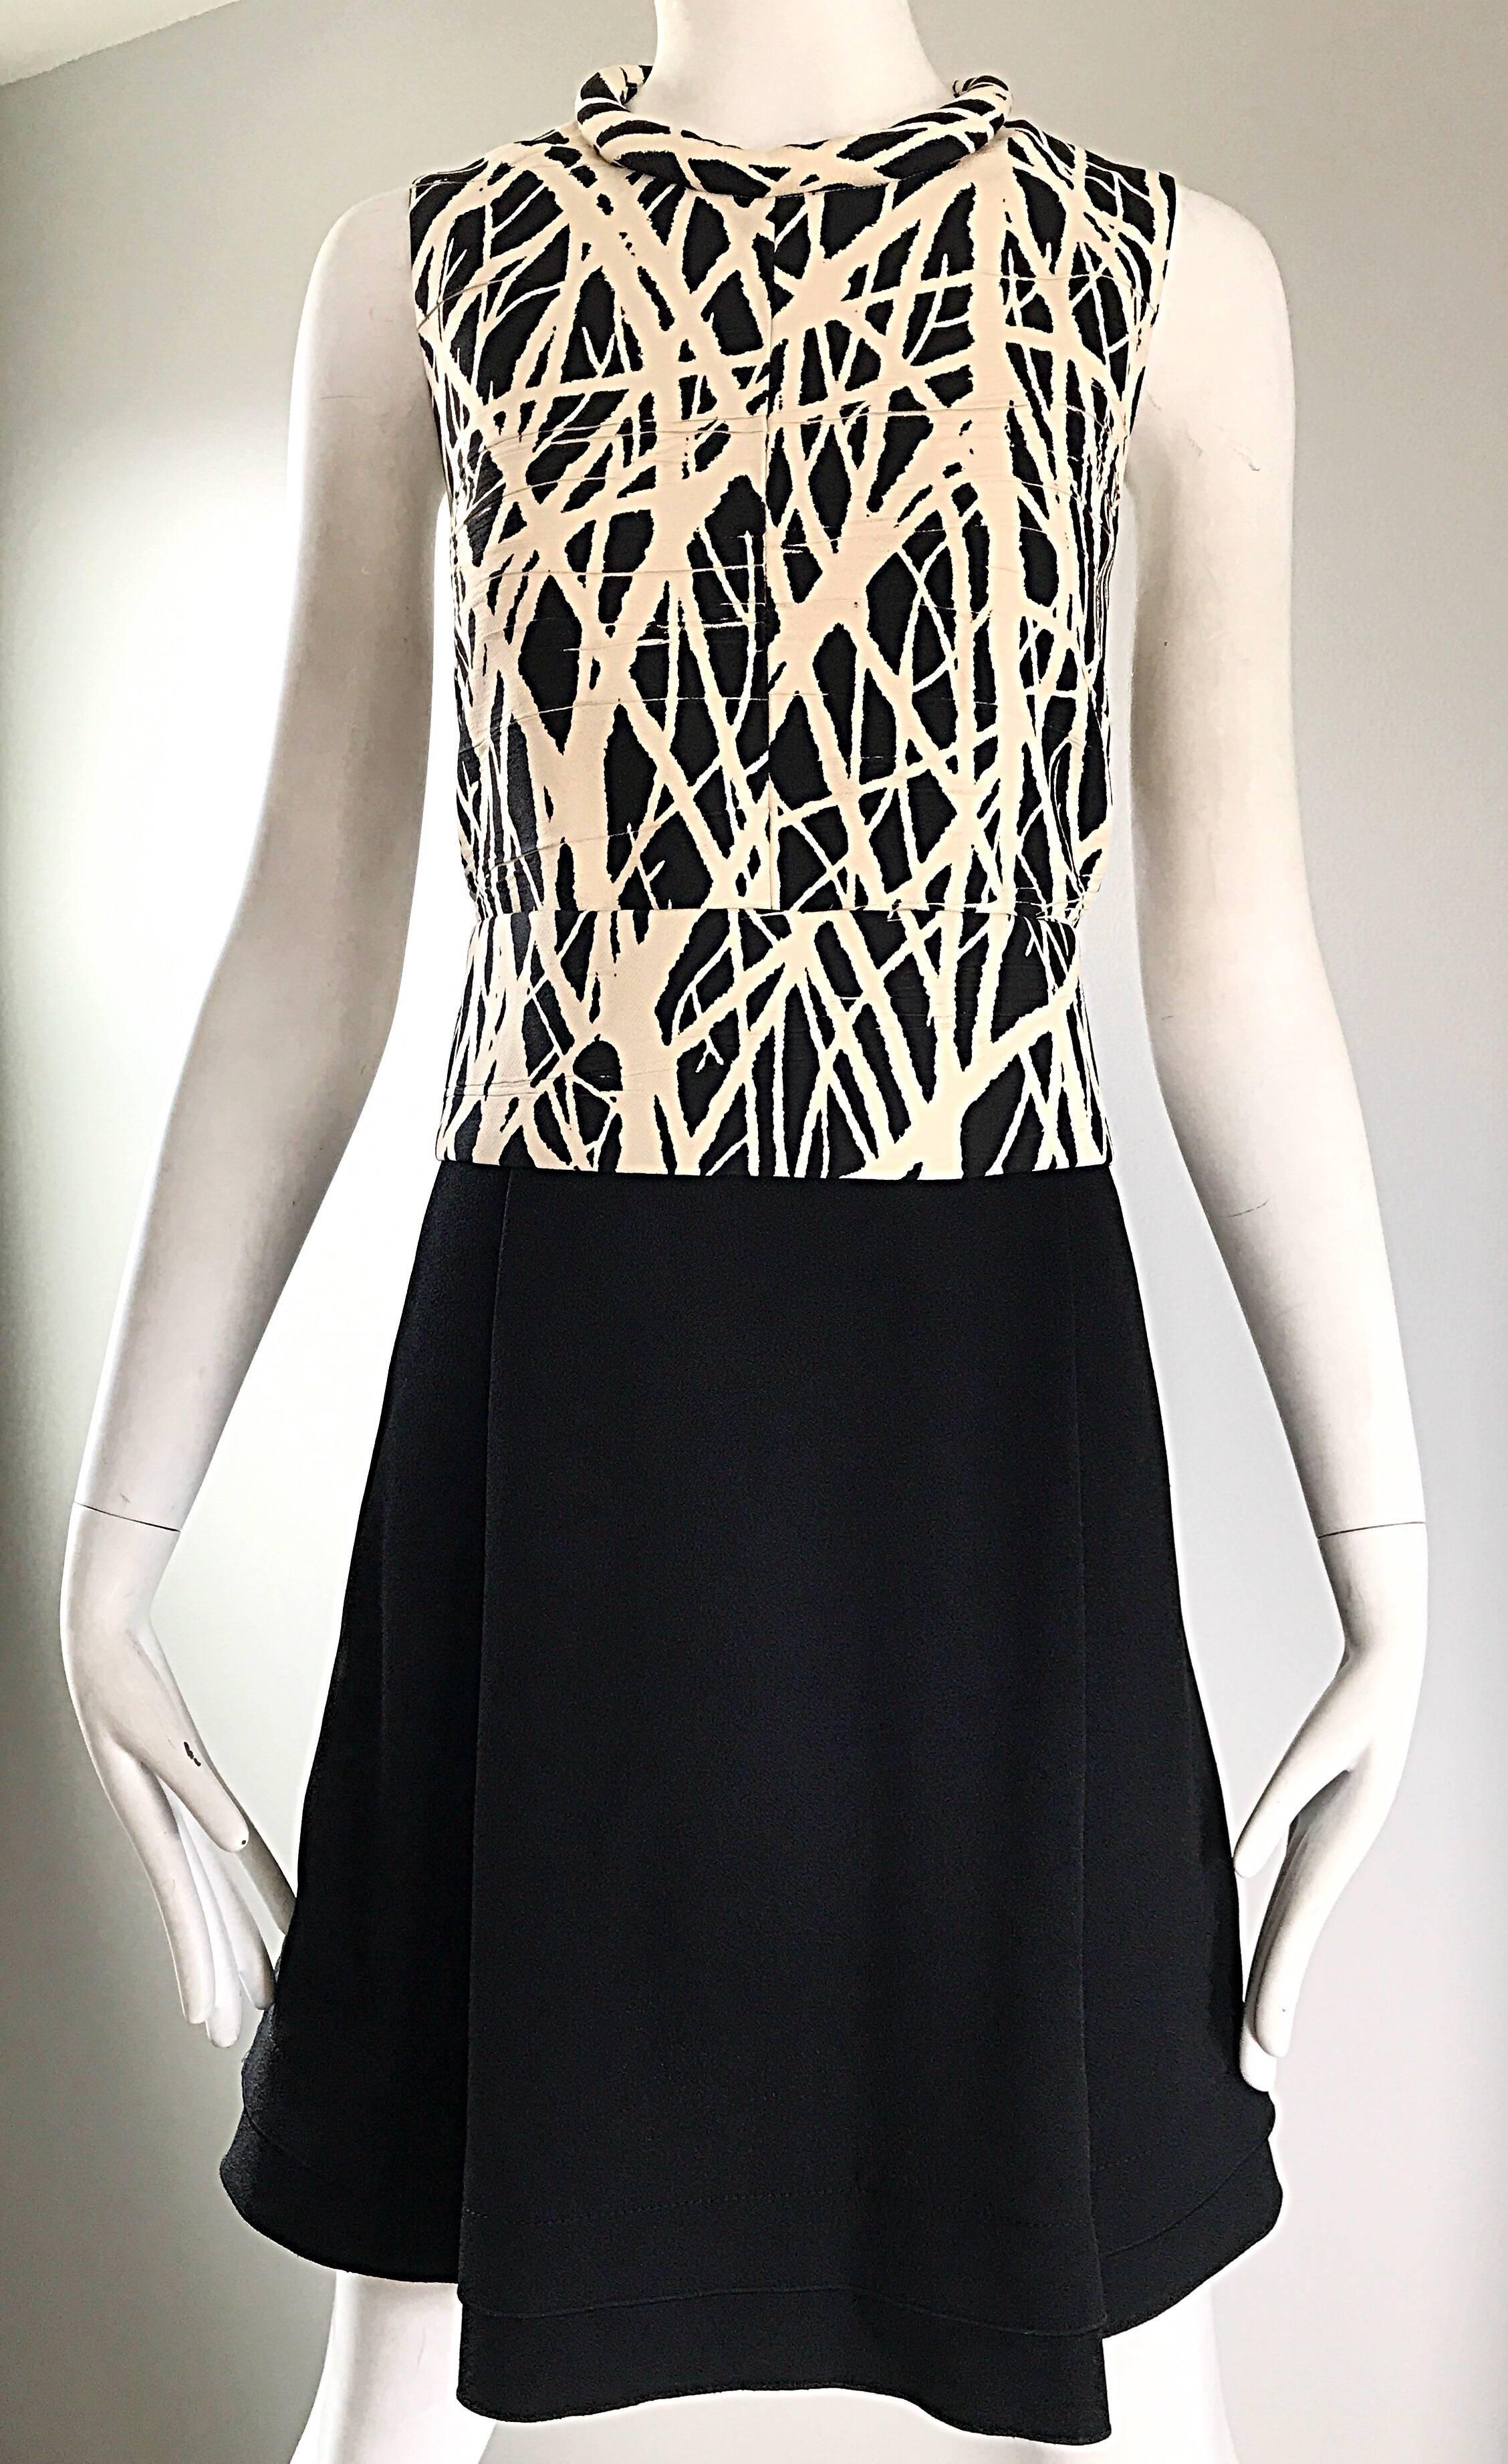 New Proenza Schouler Size 8 Black and White Abstract 1960s Style A Line Dress In Excellent Condition For Sale In San Diego, CA